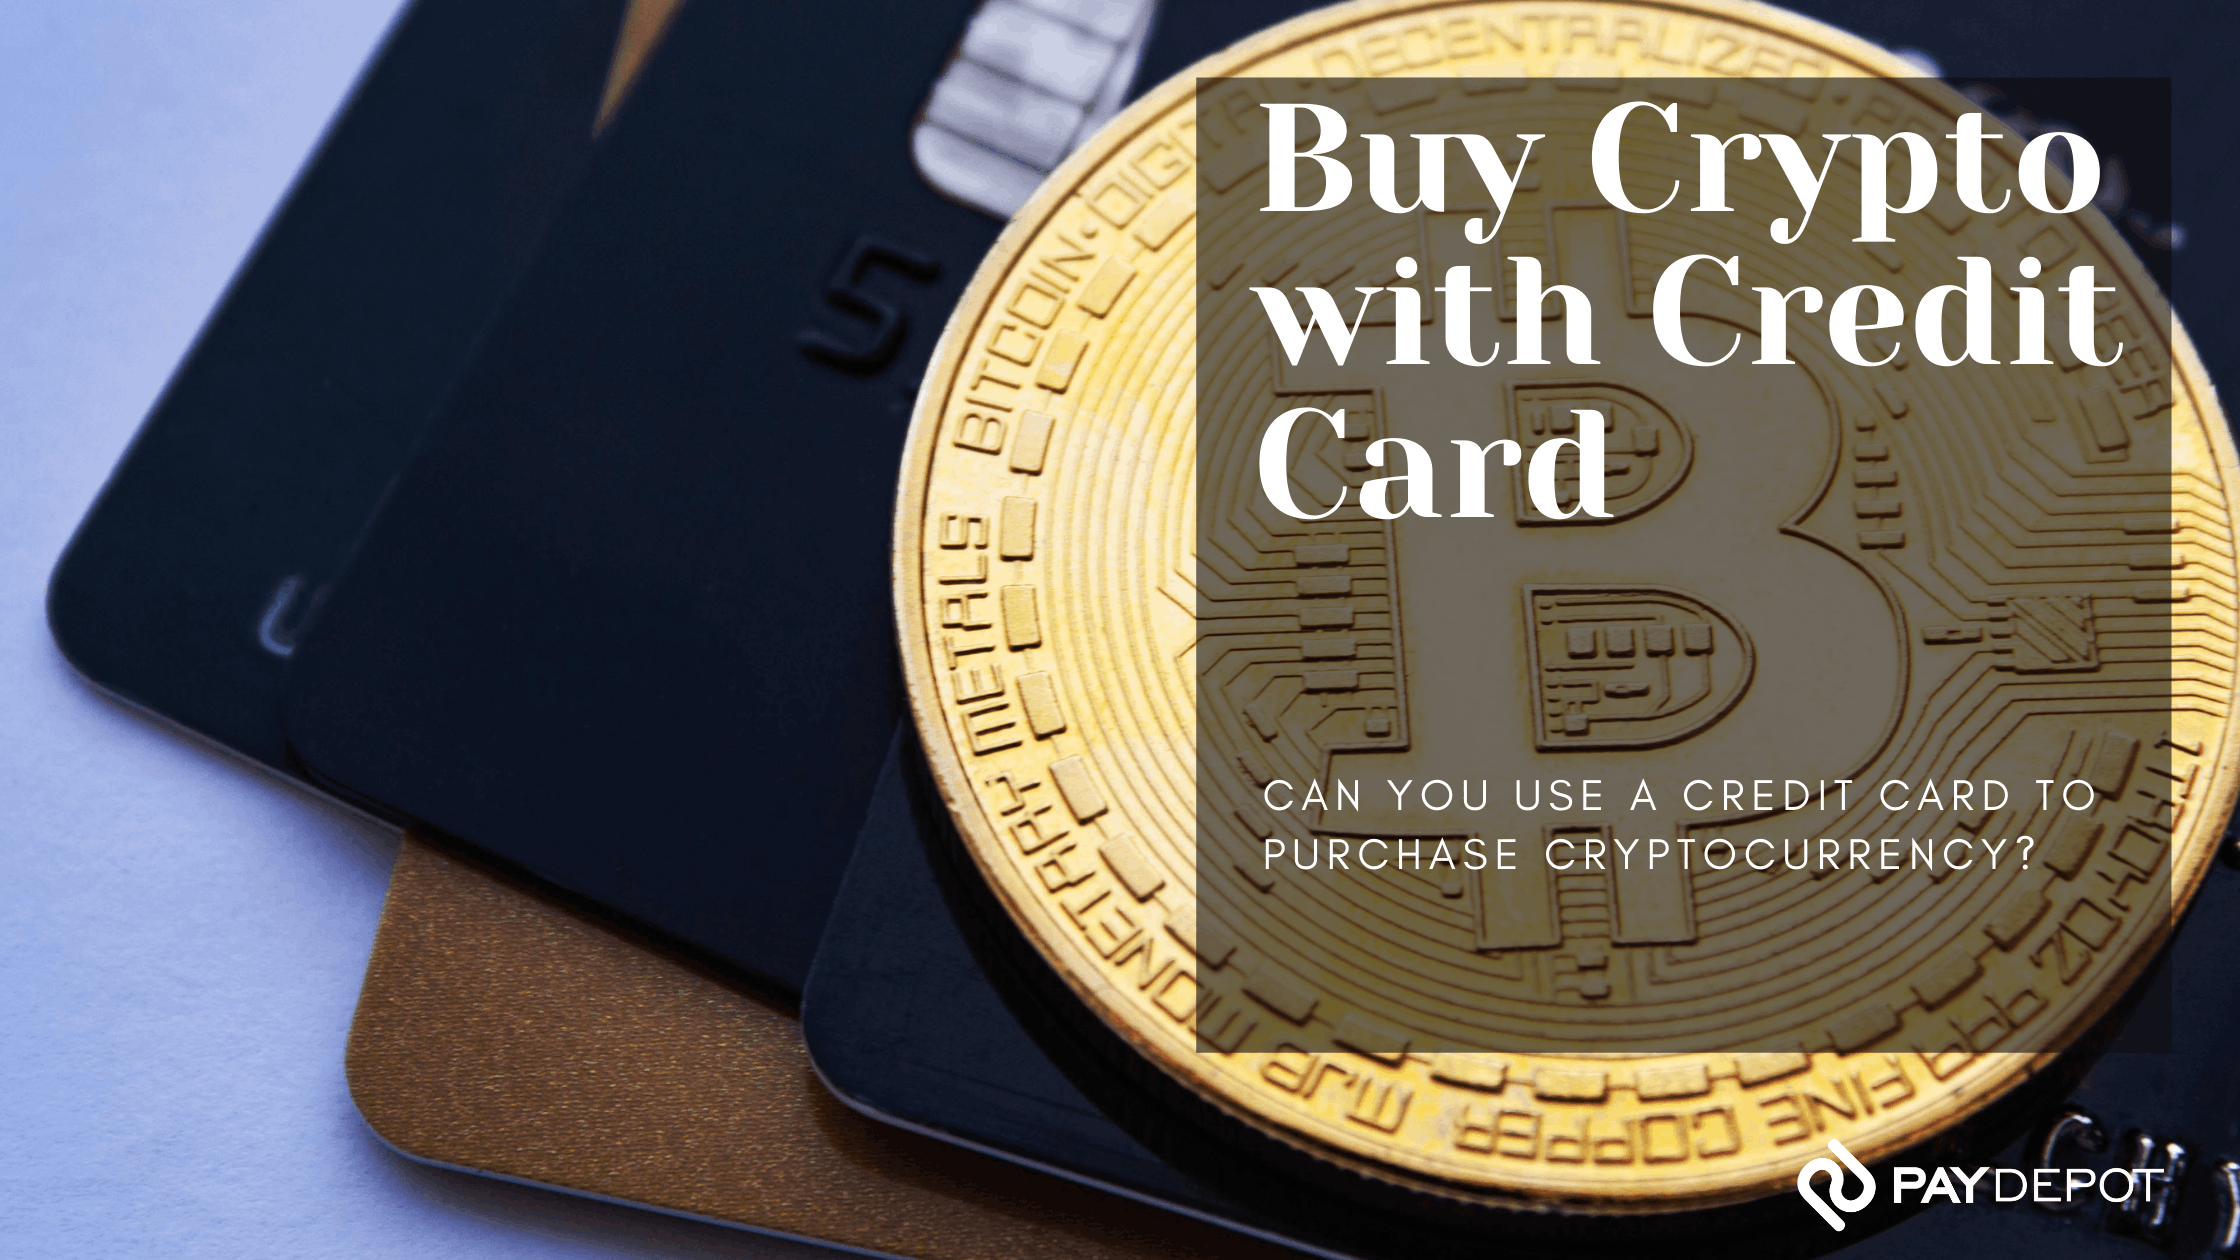 Can You Use A Credit Card To Purchase Cryptocurrency?